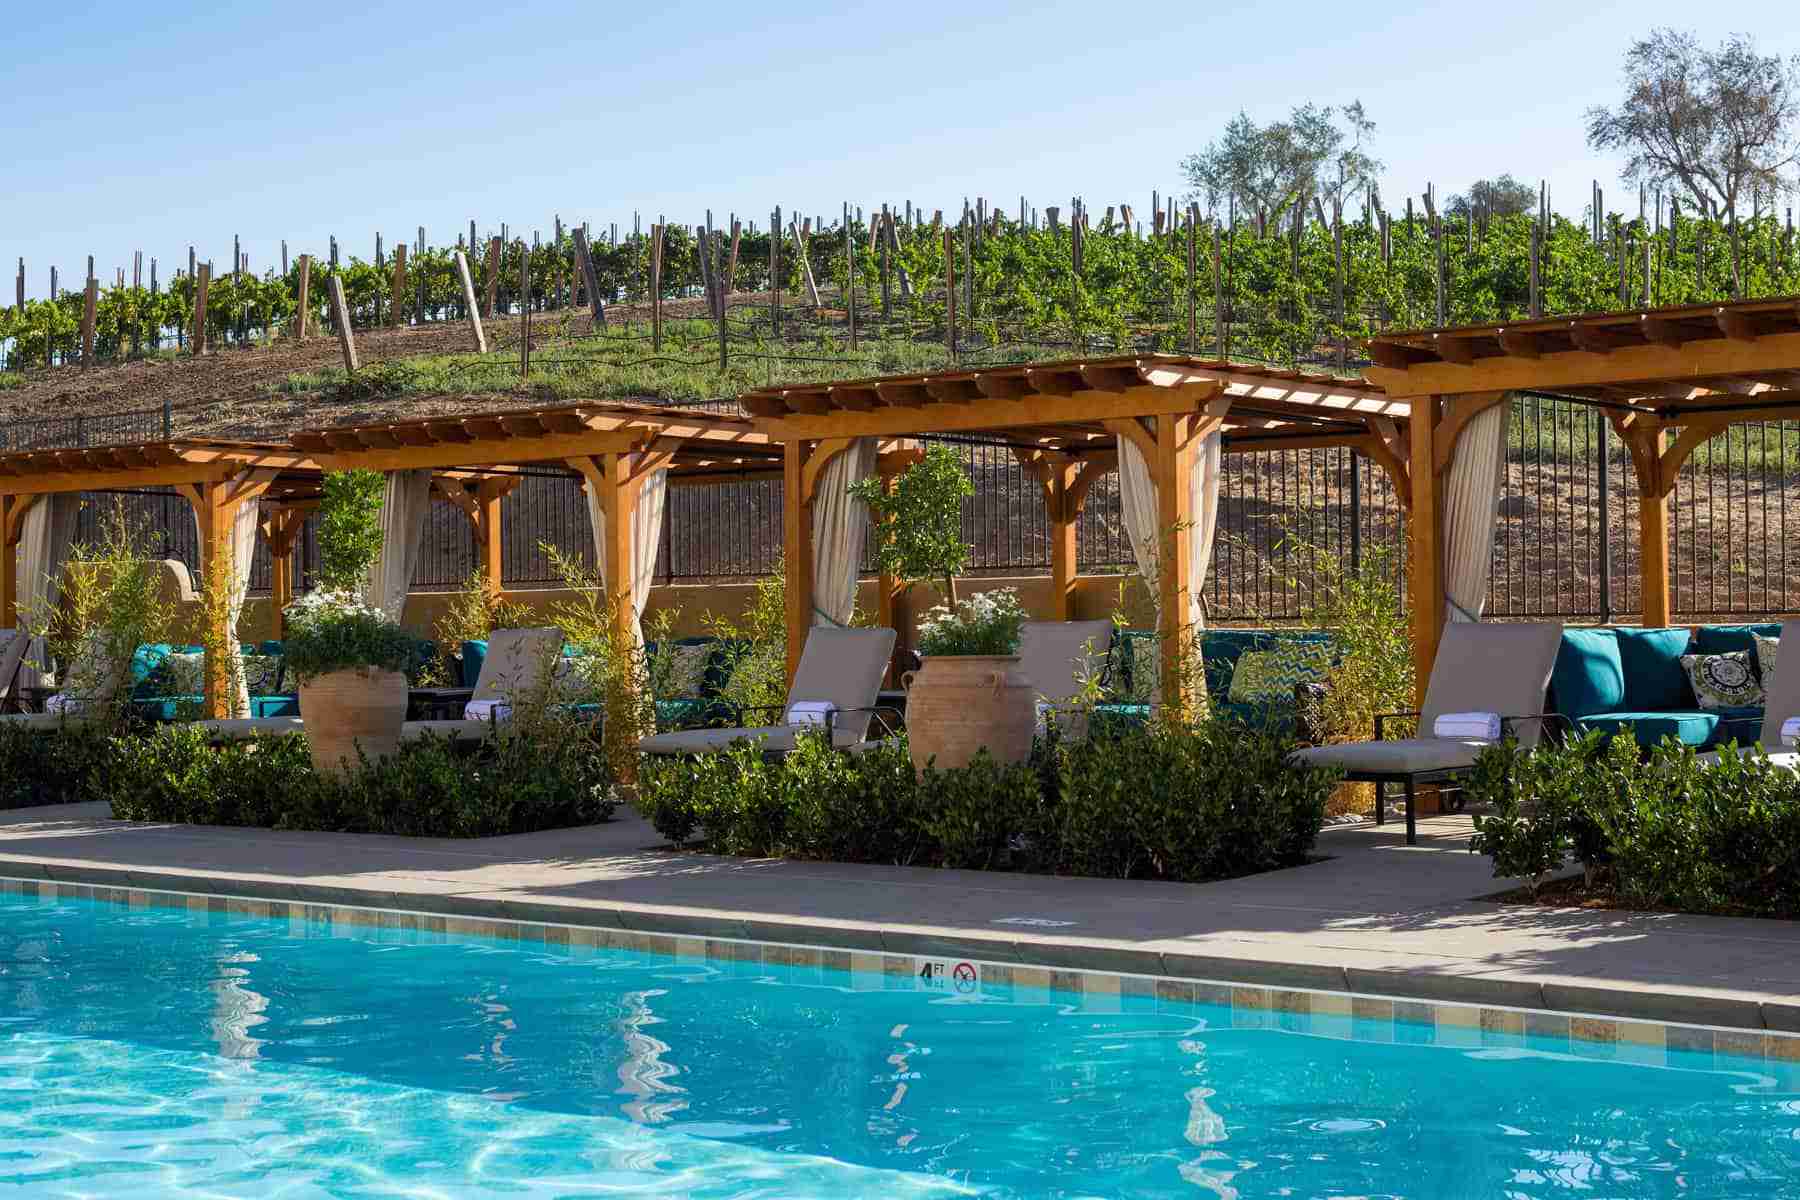 Escape Seattle to the SLO wine life in under 2 Hours